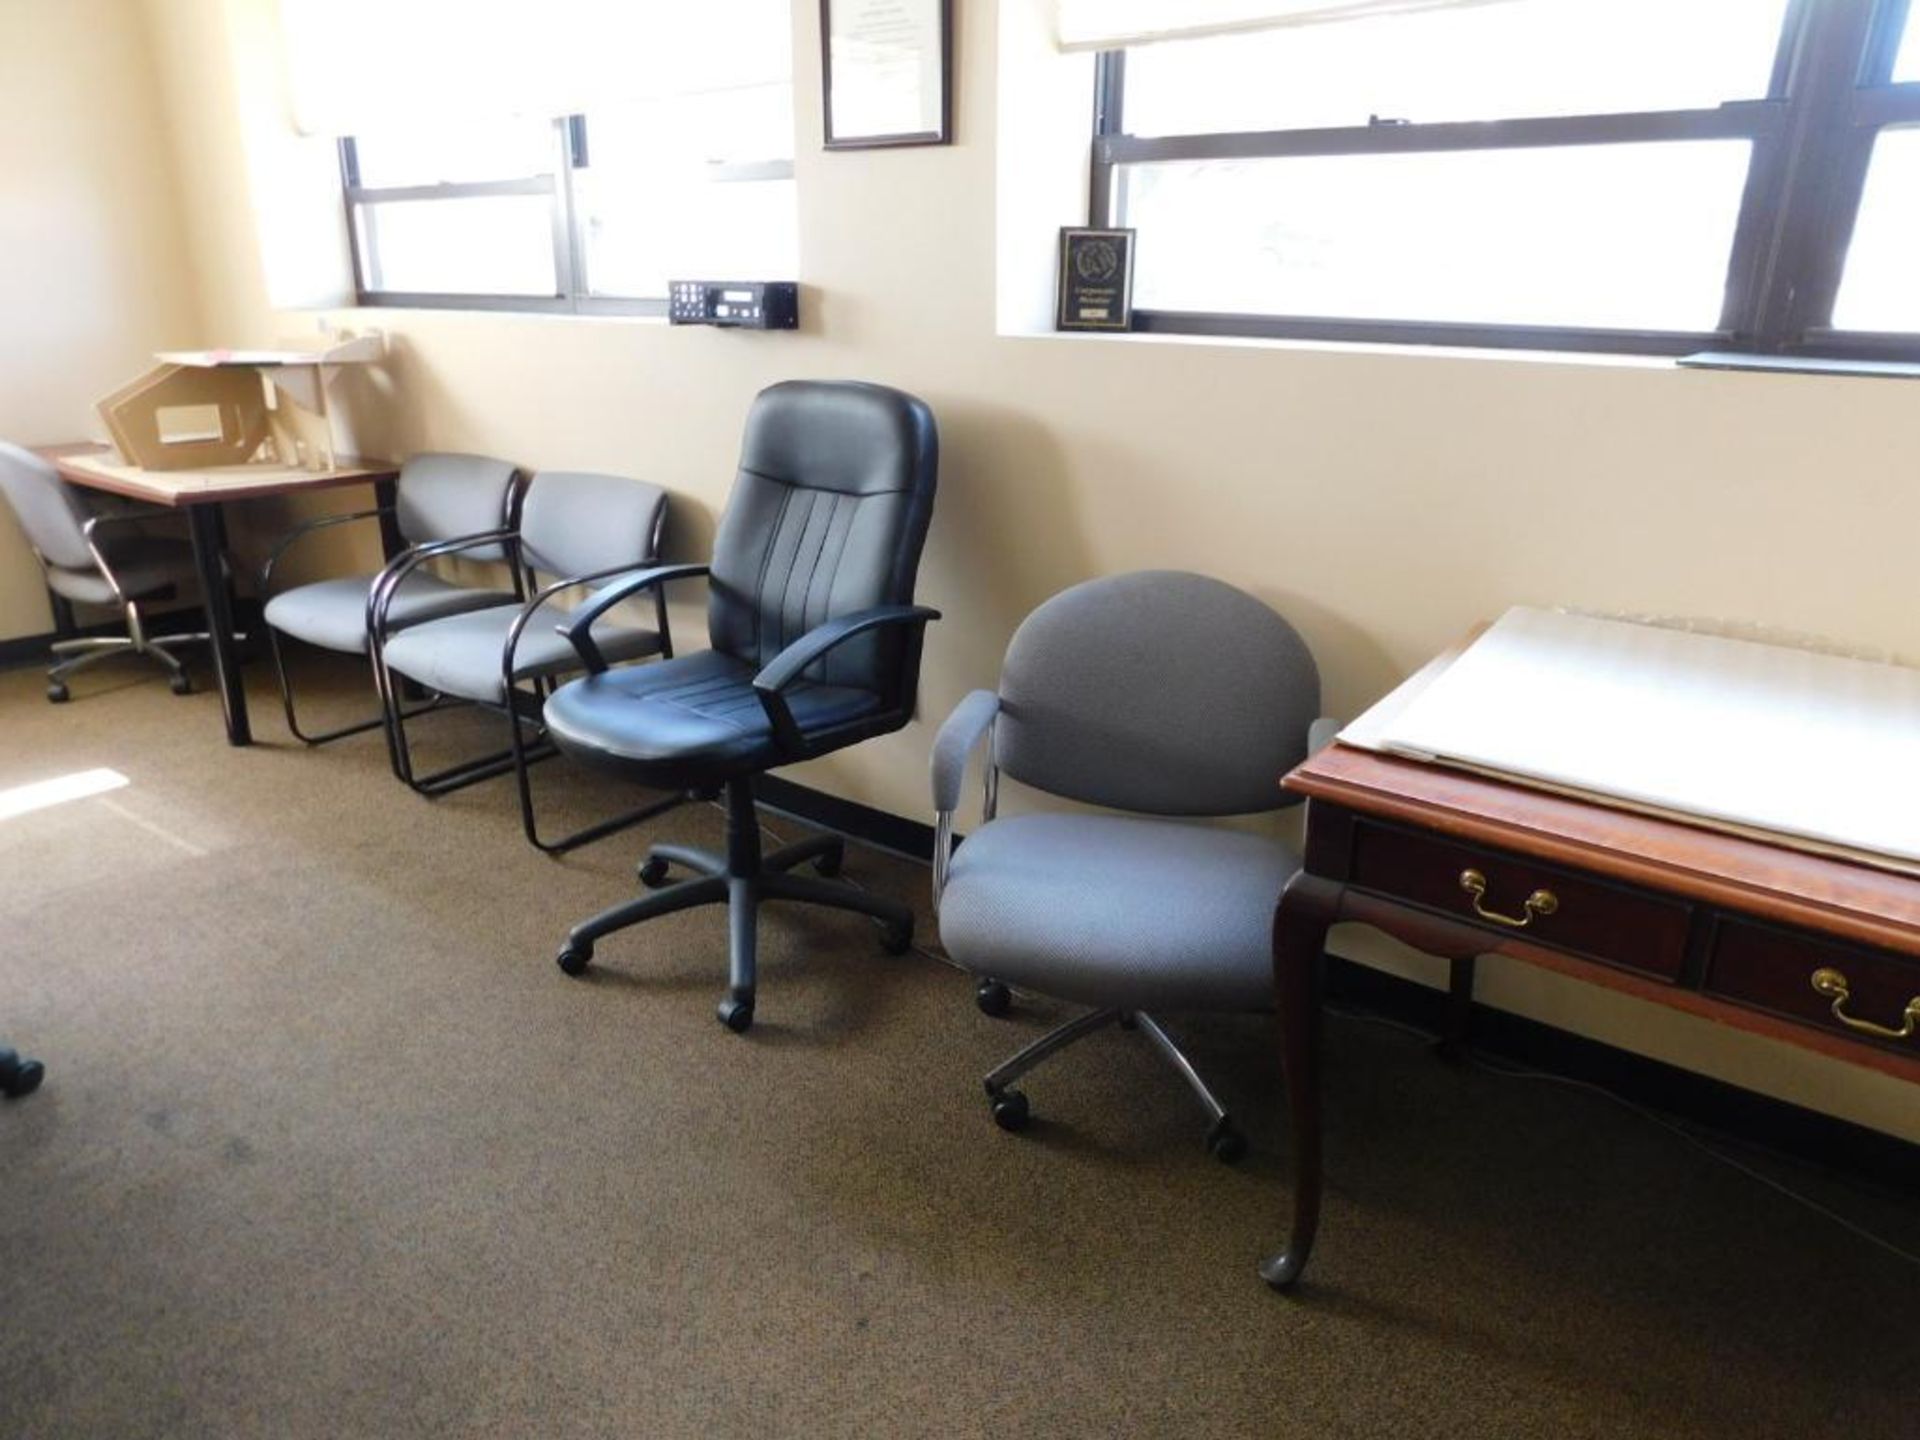 LOT: Contents of (4) Offices: (4) Cubicle Work Stations, (5) Desks, (7) Tables, (16) Chairs, Visio B - Image 15 of 15